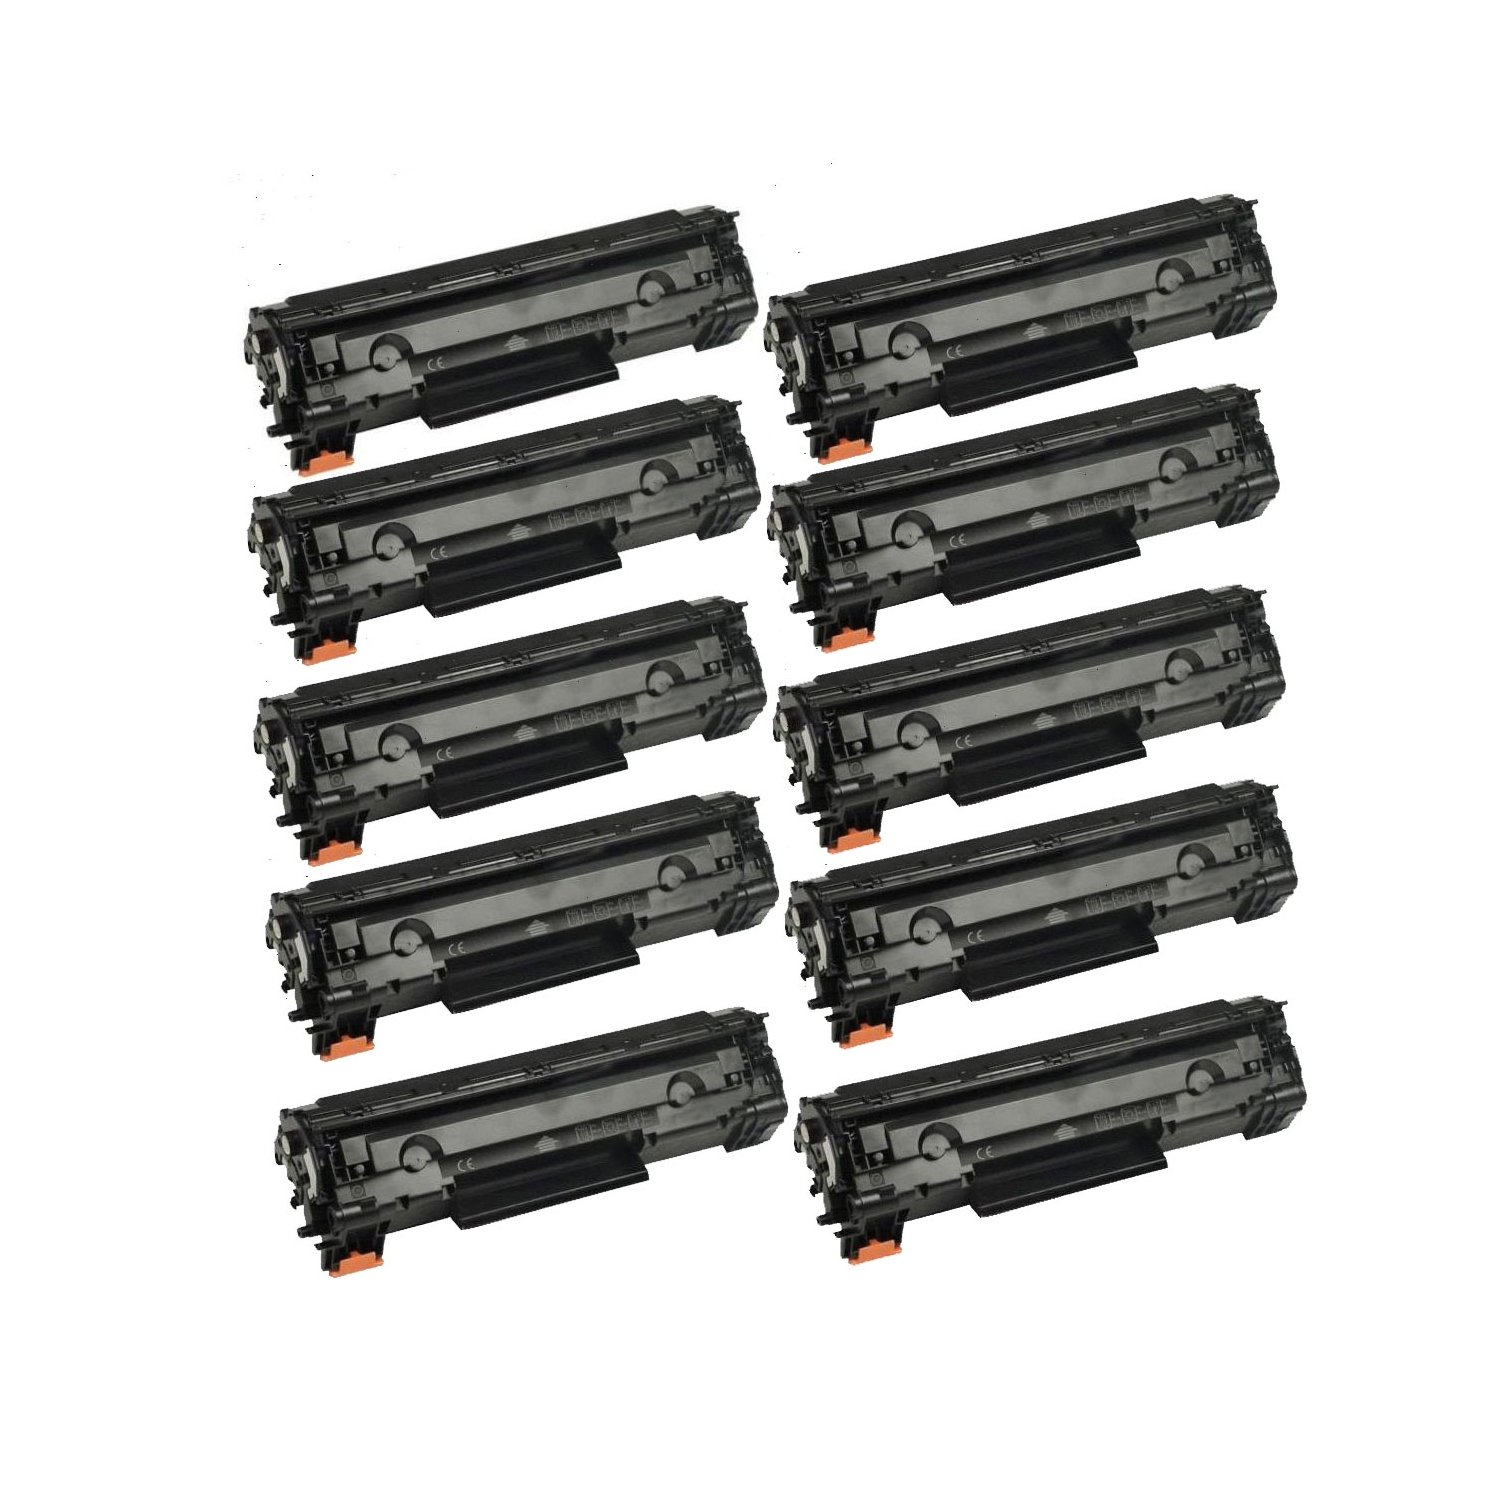 10 Pack CRG128 Compatible Toner Cartridge for Canon 128 L100,D550,MF4412,MF4420n,MF4450,MF4550,MF4570dn,MF4580dn ,MF4770n ,MF4880dw,MF4890dw